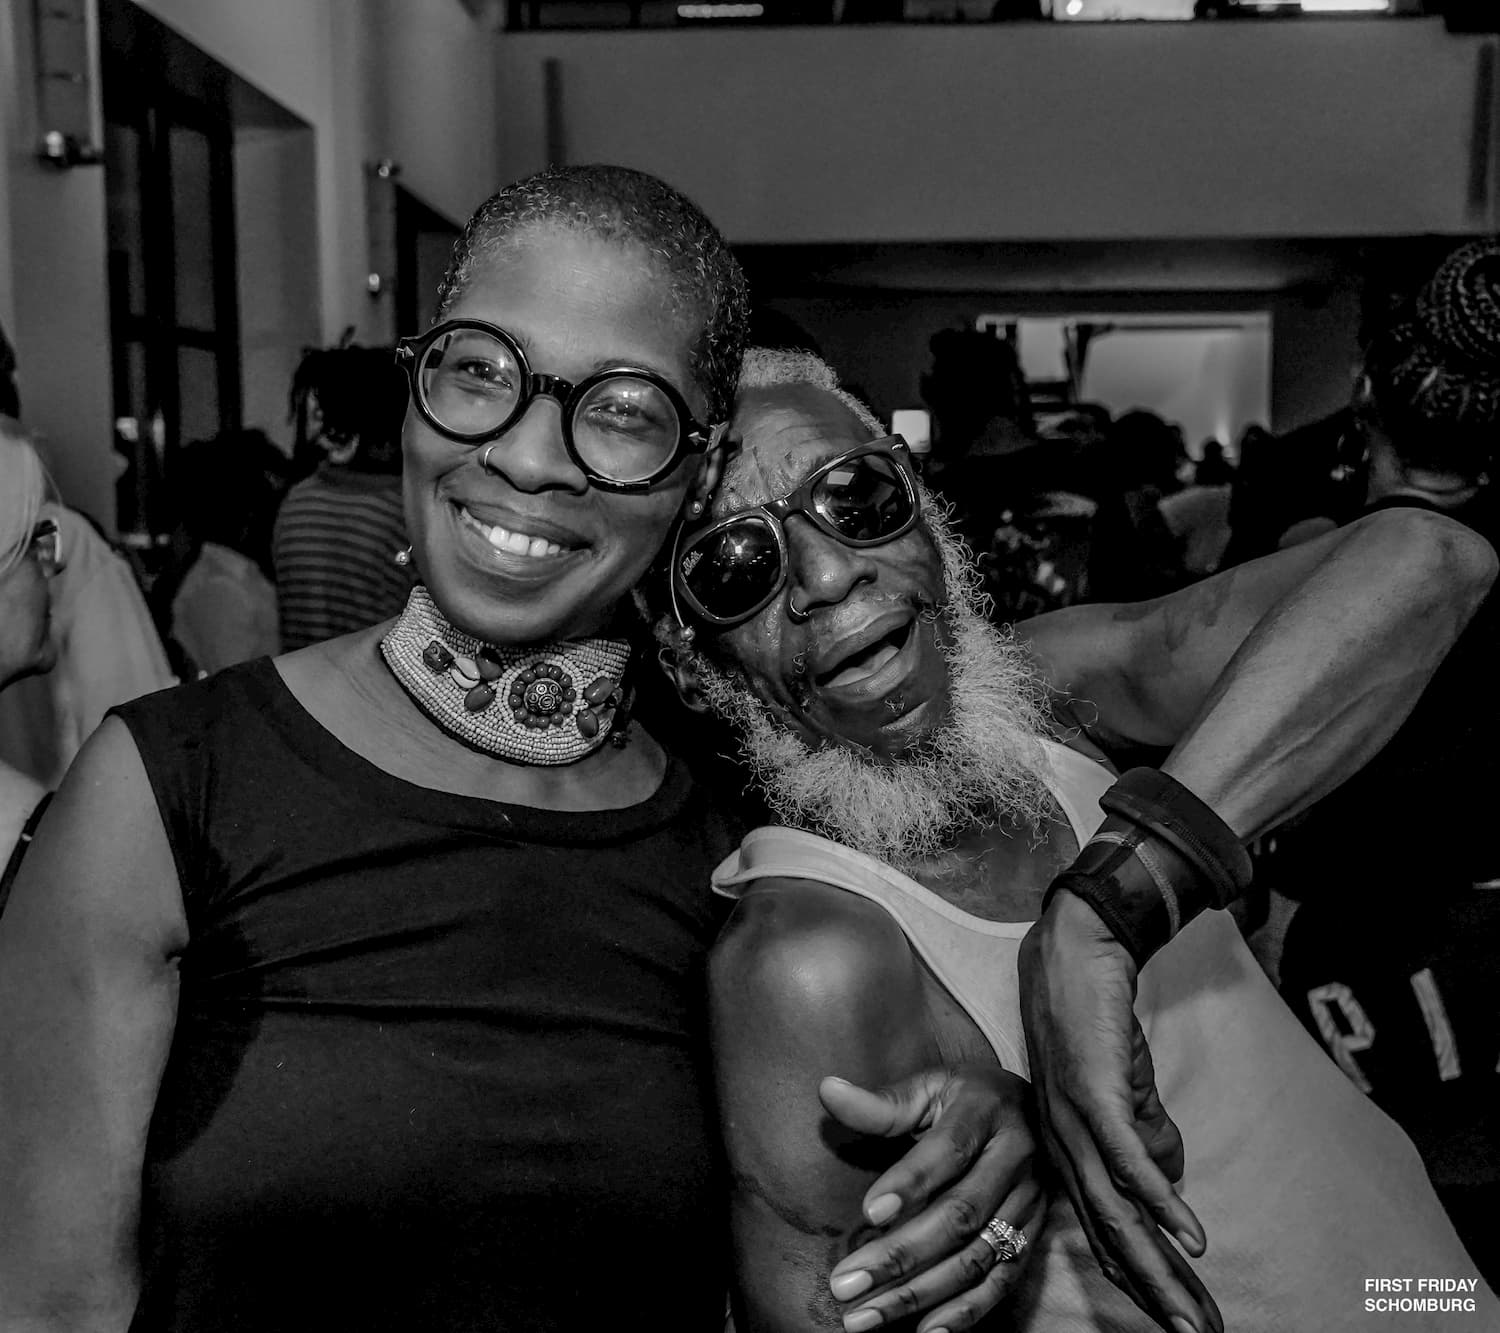 Guests at the fifth annual First Fridays: House Music Edition, a celebration of DJ Larry Levan, a house music pioneer in New York City, best known for his decade-long residency at the popular New York City nightclub Paradise Garage, August 2018. Photographer: Emmanuel Mensah Agbeble (@Apmworldmag); Photographs and Prints Division, Schomburg Center for Research in Black Culture, The New York Public Library, Astor, Lenox and Tilden Foundations.